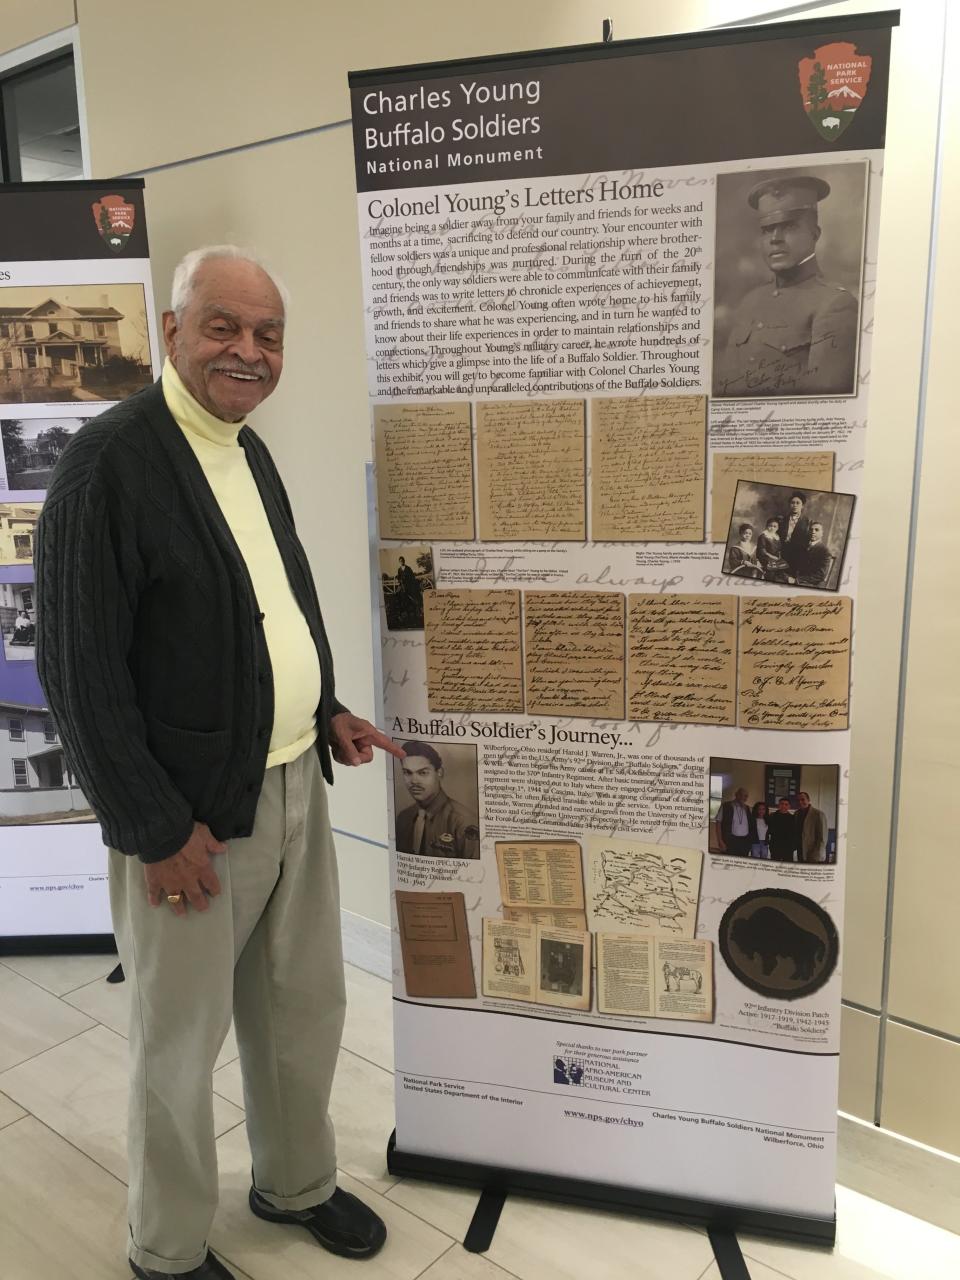 Harold J. Warren points to a display honoring his WWII service at the Charles Young Buffalo Soldiers National Monument in Ohio.